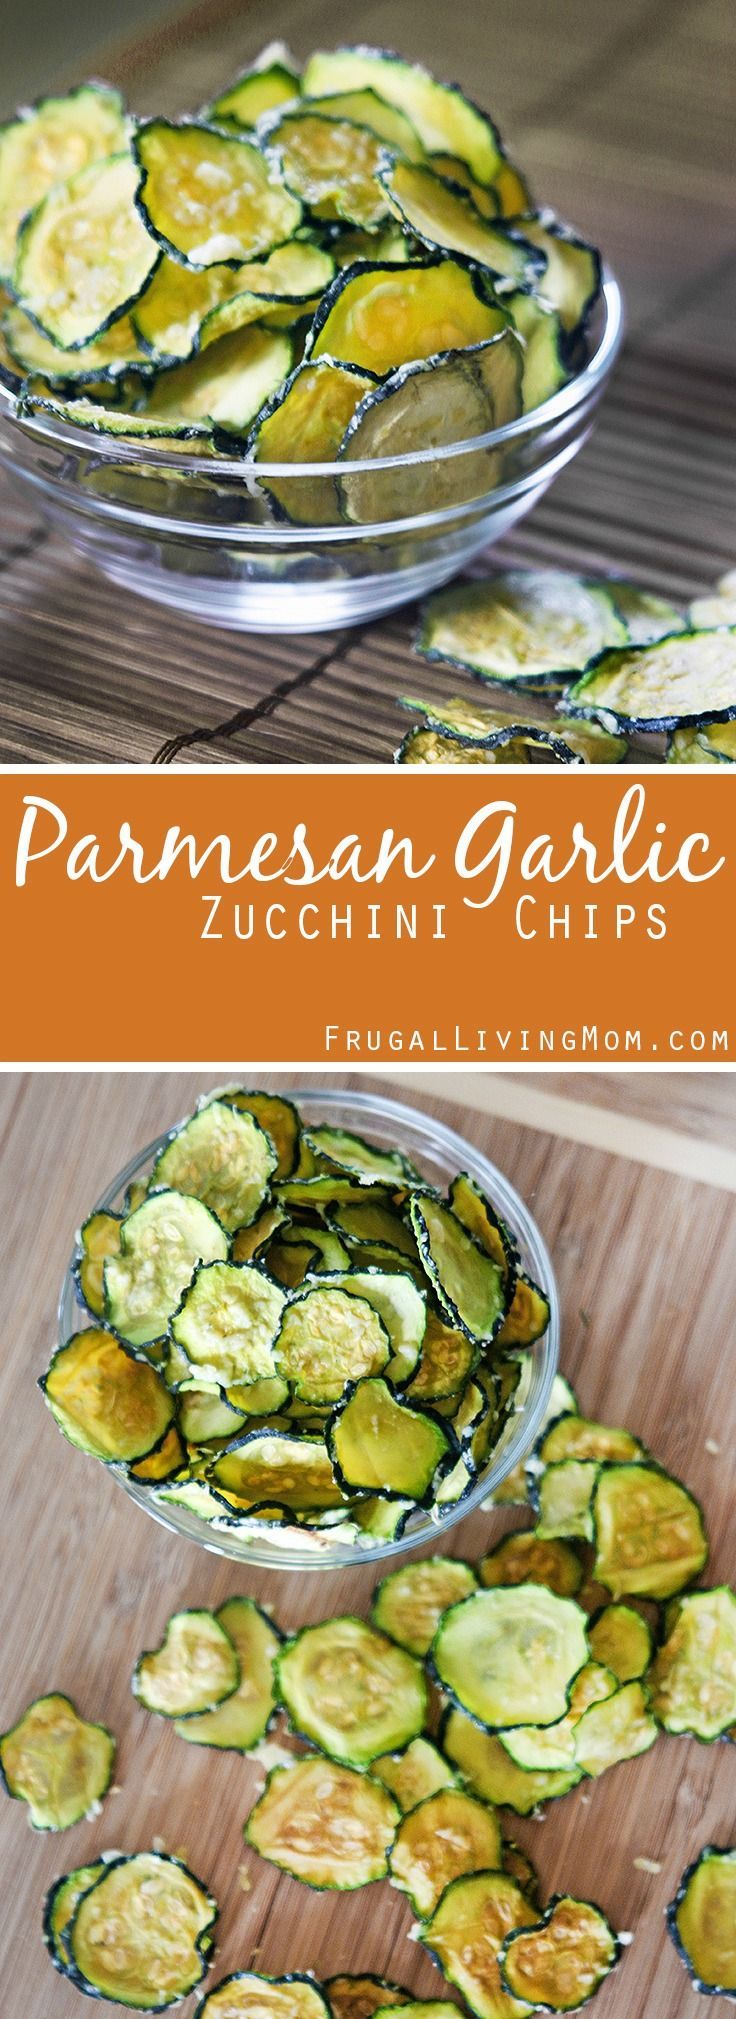 Parmesan Garlic Zucchini Chips!! Yum! Looking for a #healthy snack for the whole family? Give these a try.